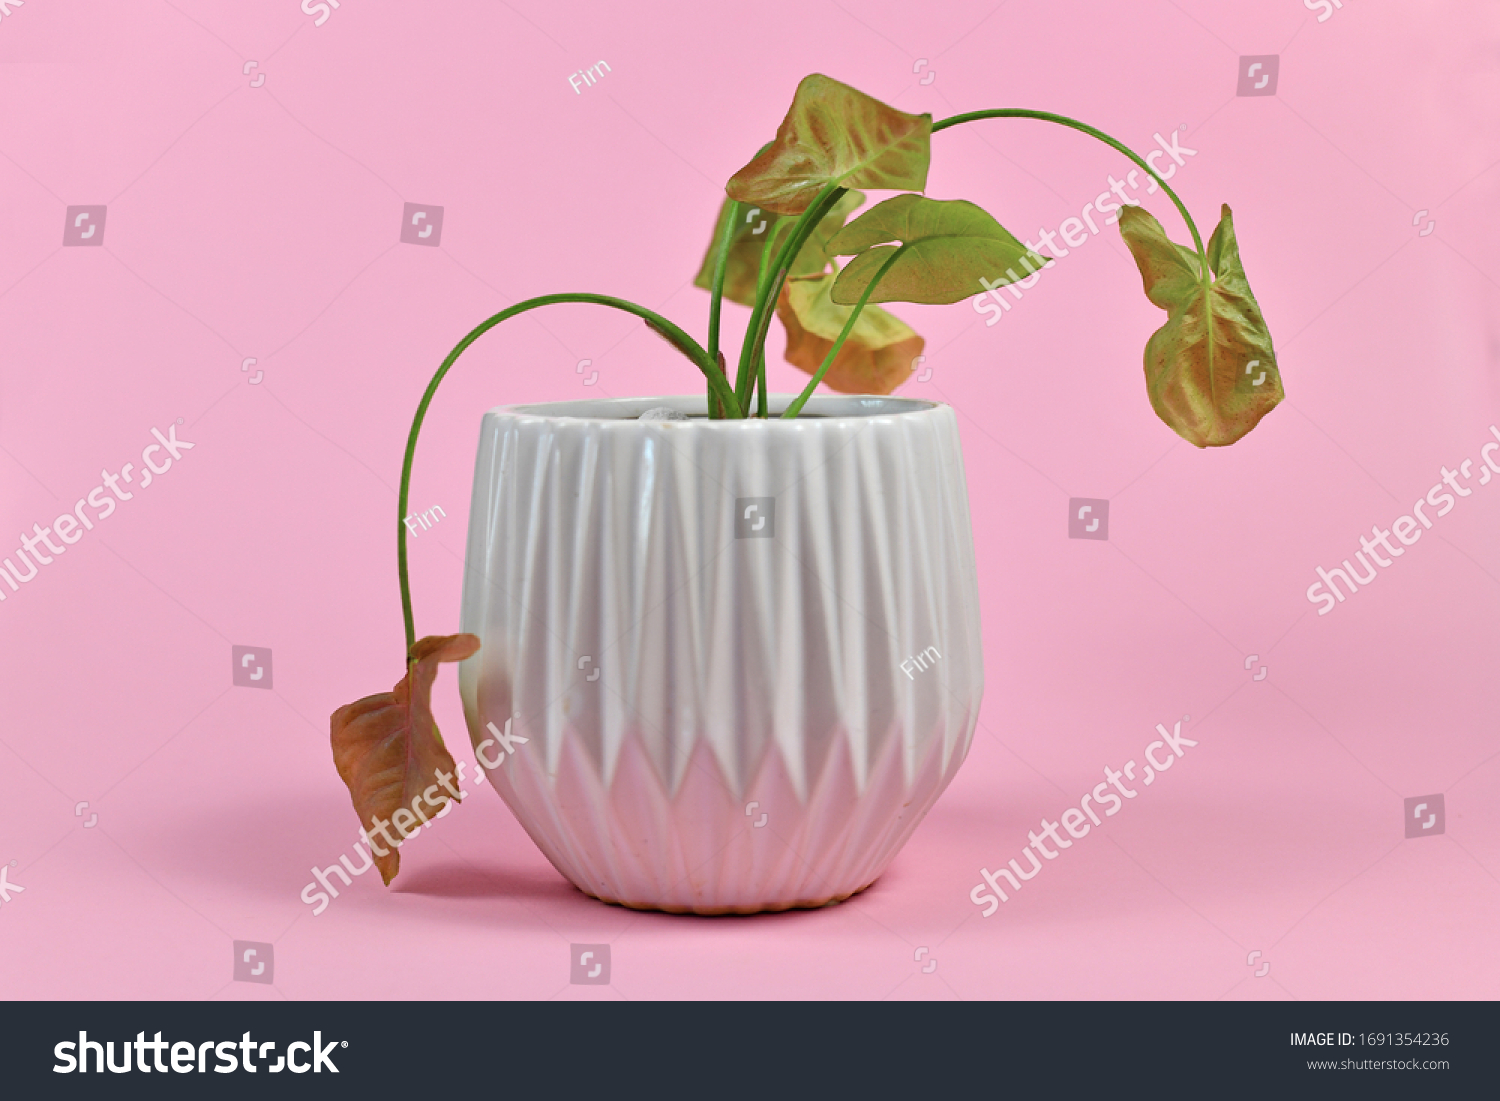 Neglected dying house plant in white flower pot on pink background #1691354236